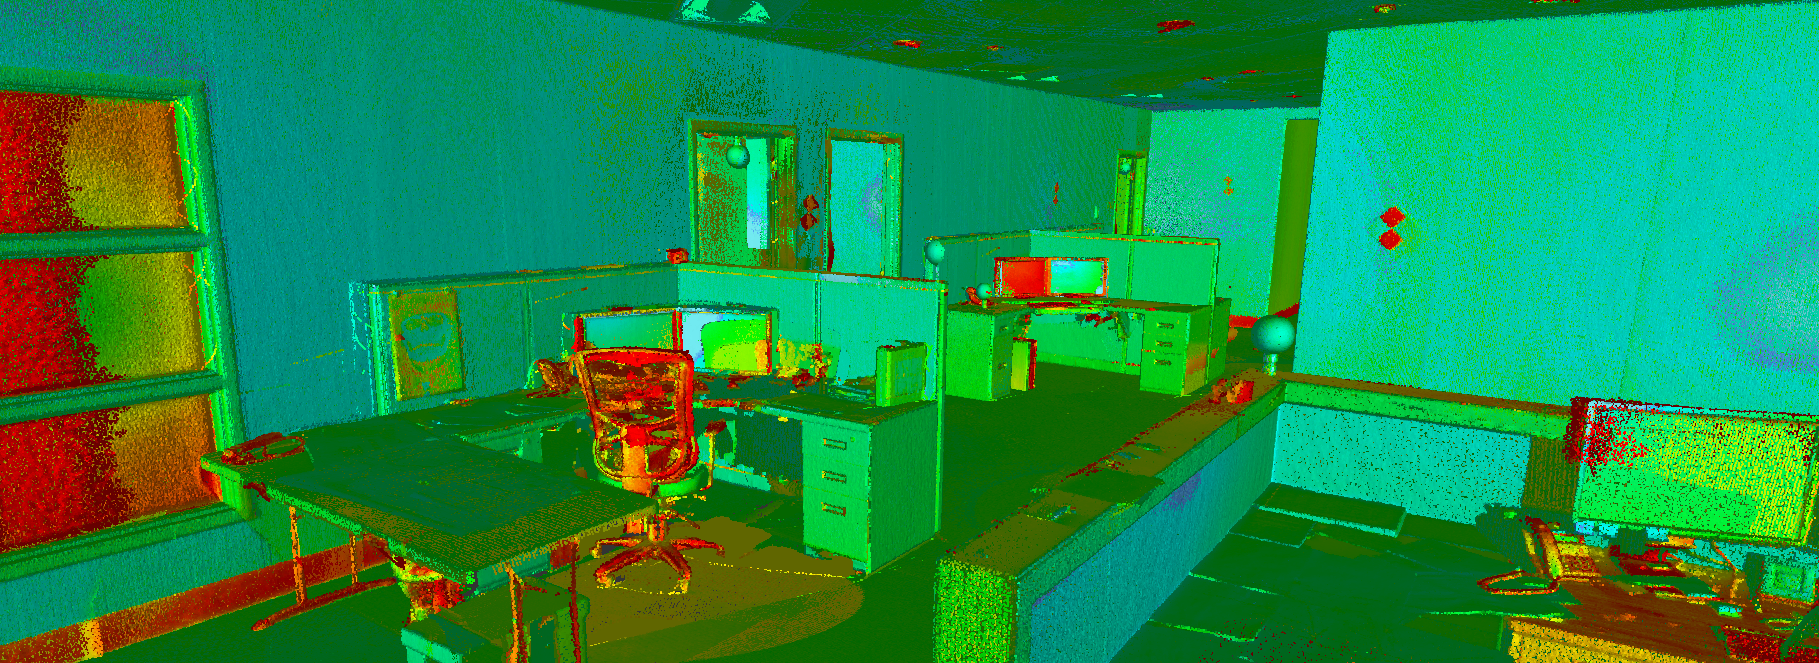 interior office laser scan & point cloud